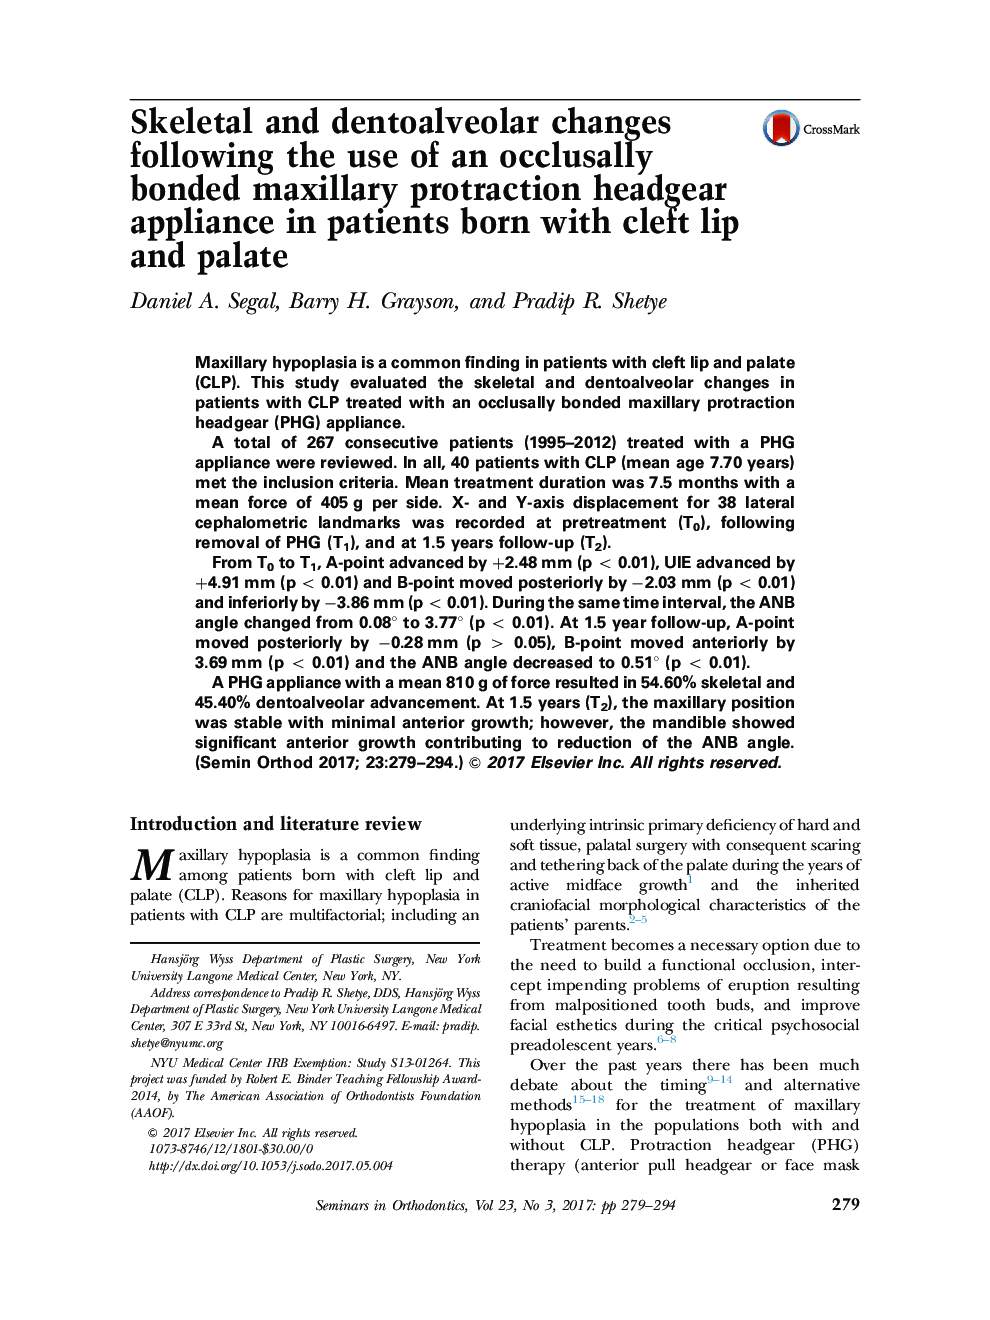 Skeletal and dentoalveolar changes following the use of an occlusally bonded maxillary protraction headgear appliance in patients born with cleft lip and palate